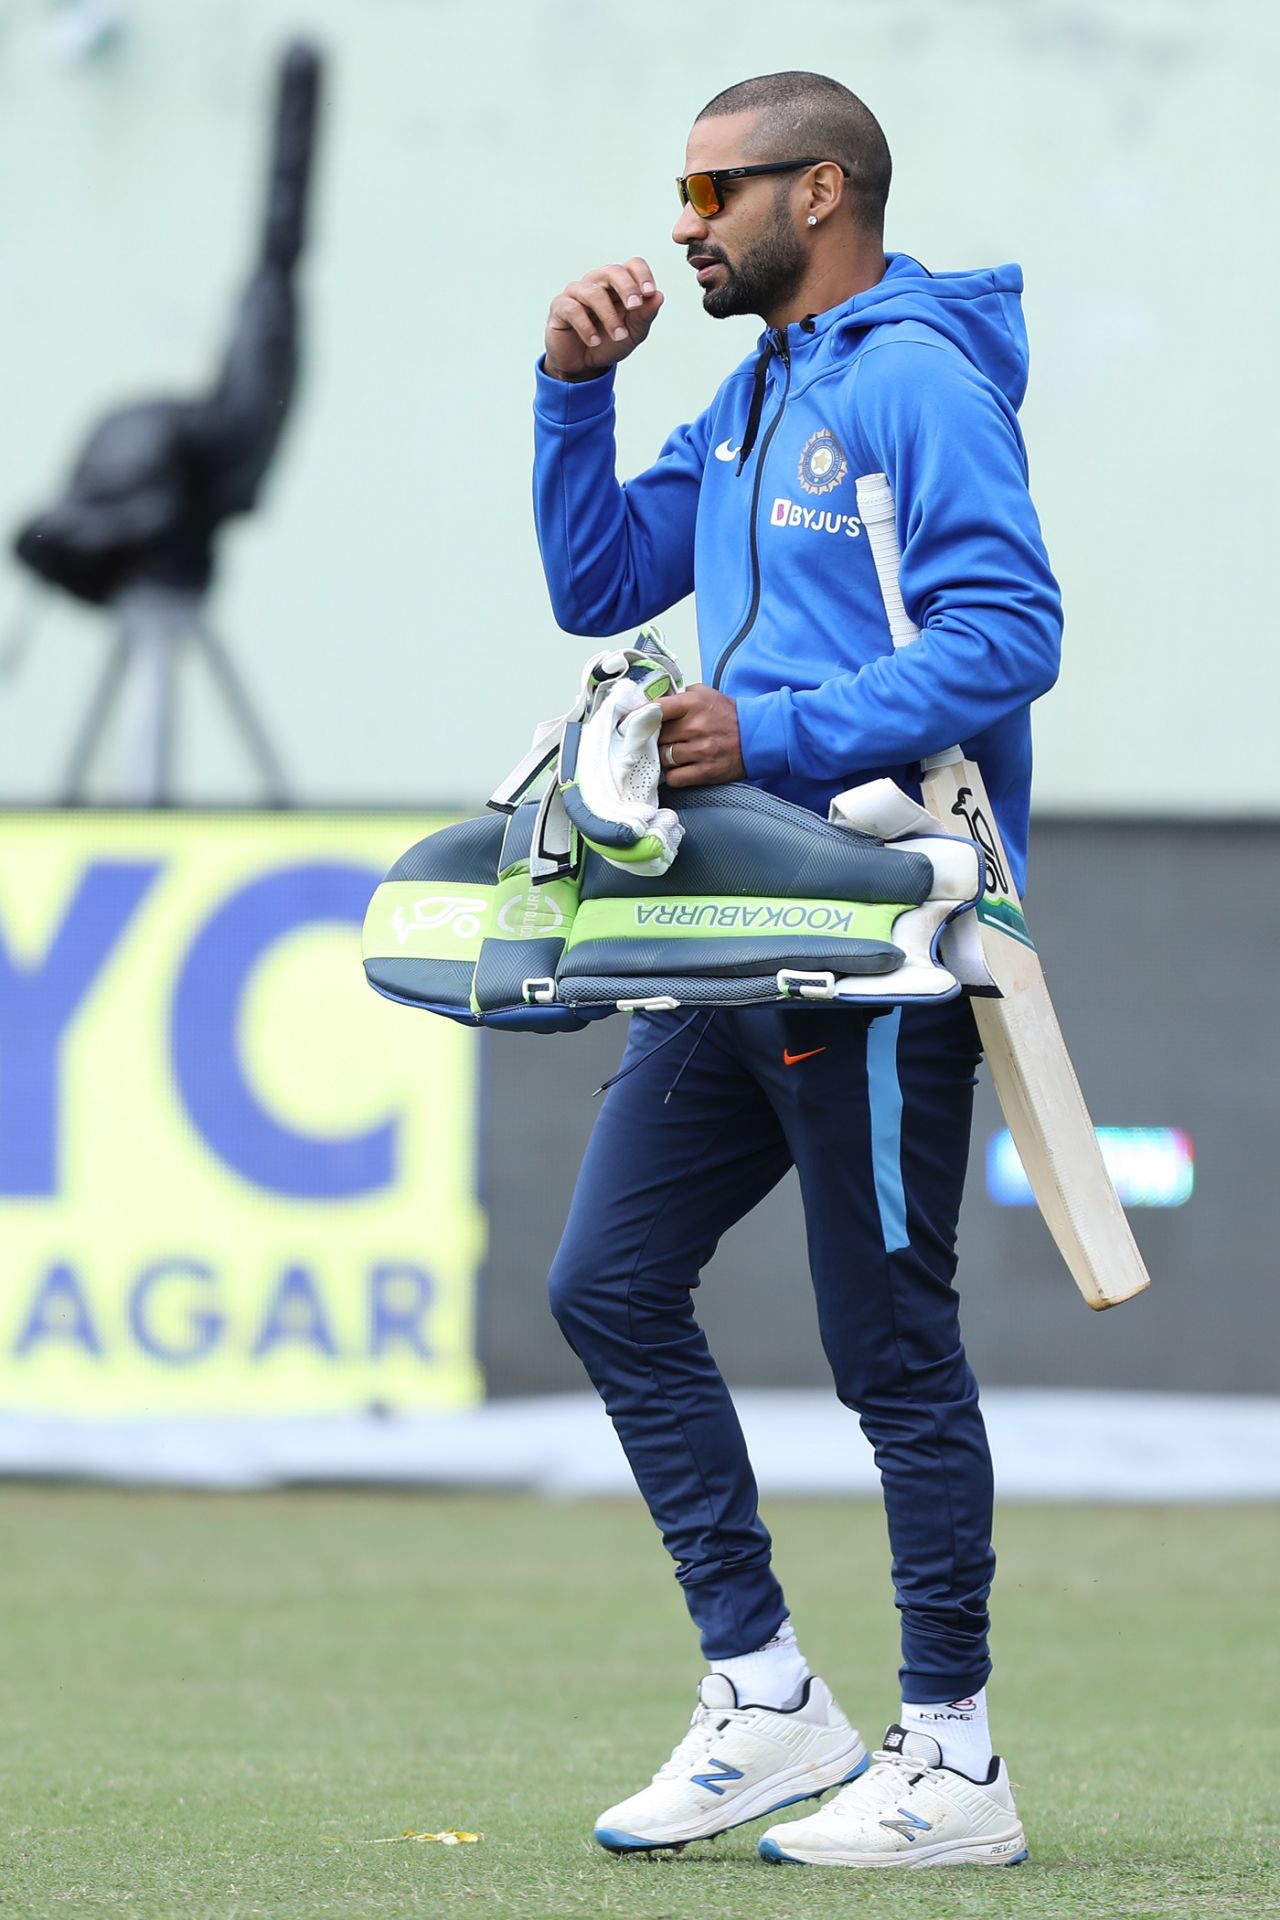 Shikhar Dhawan comes out for practice, India v South Africa, 1st ODI, Dharamsala, March 12, 2020